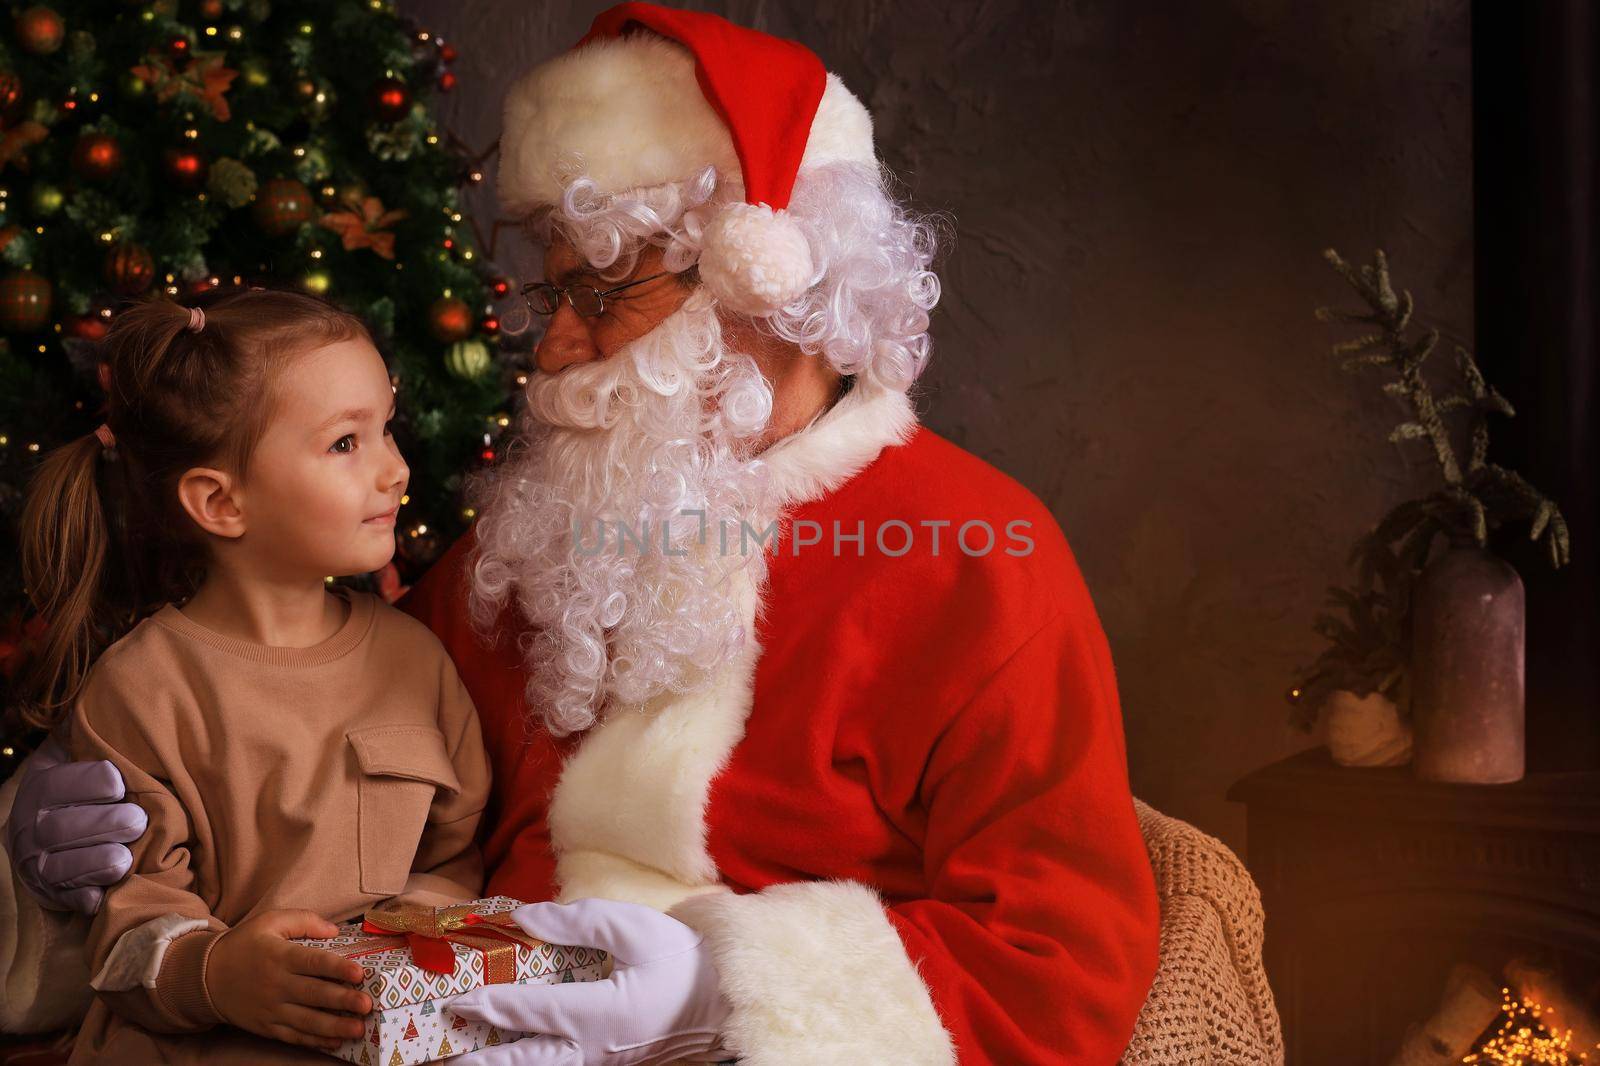 Santa Claus and child at home. Christmas gift. Family holiday concept